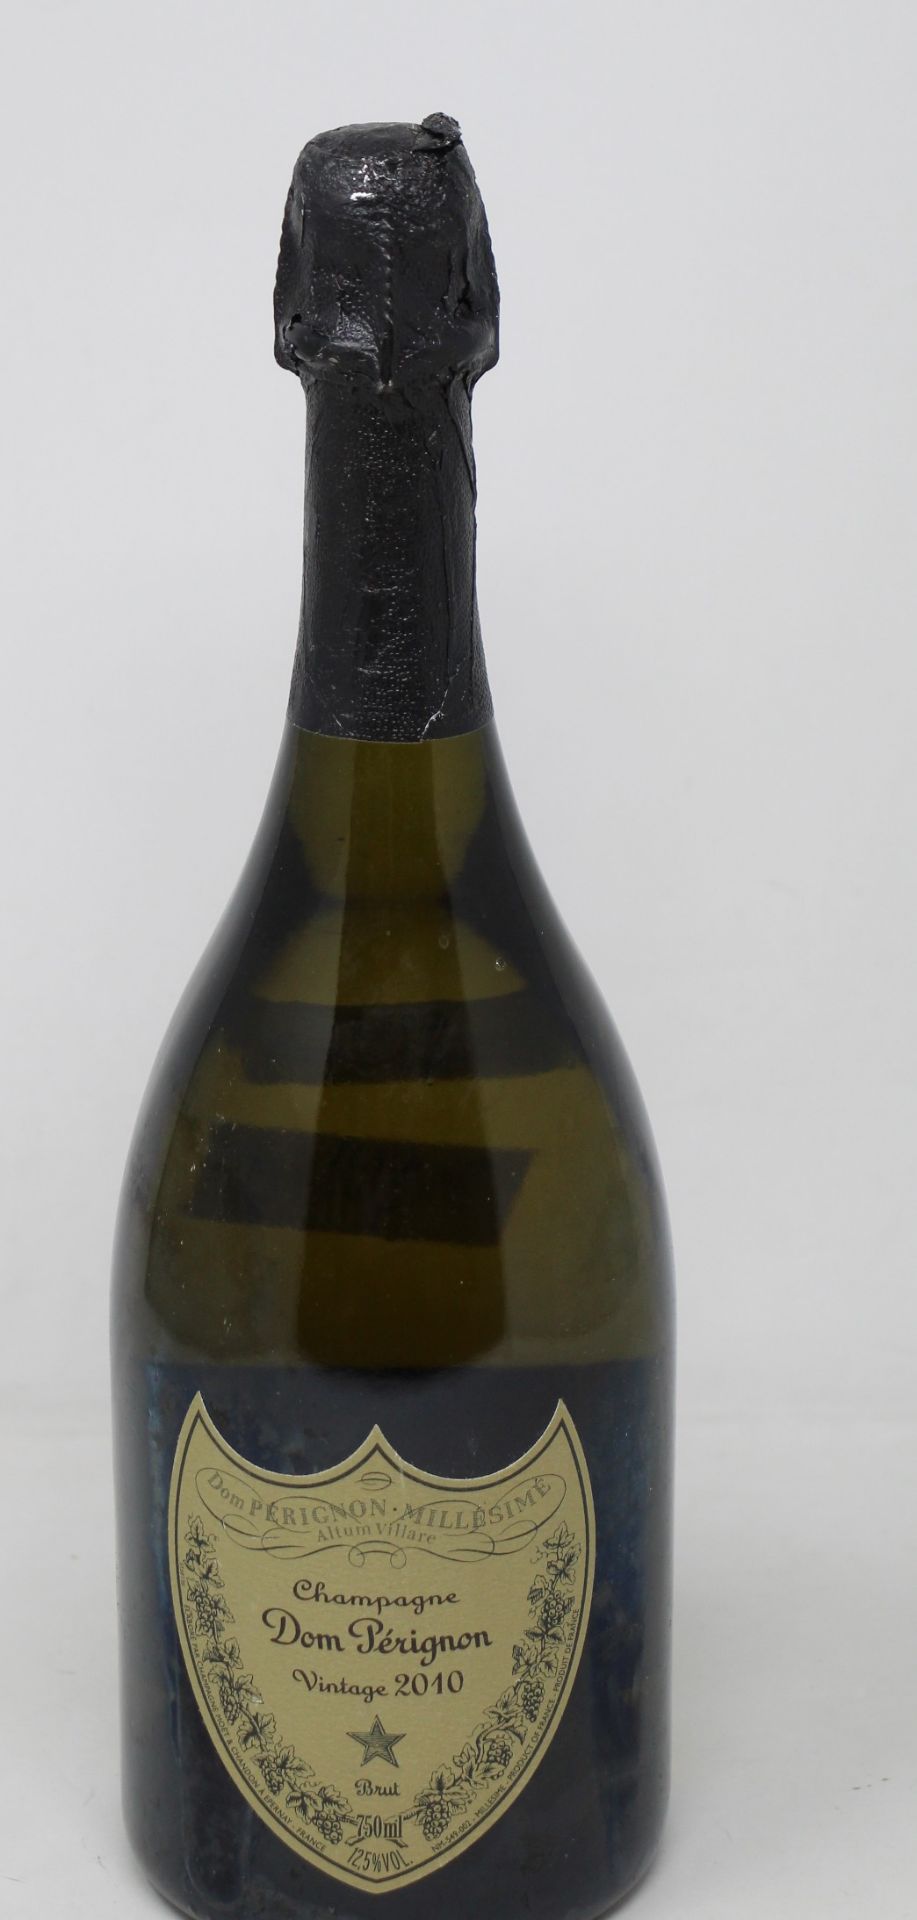 A bottle of Don Perignon champagne vintage 2010 (750ml) (Over 18's only).